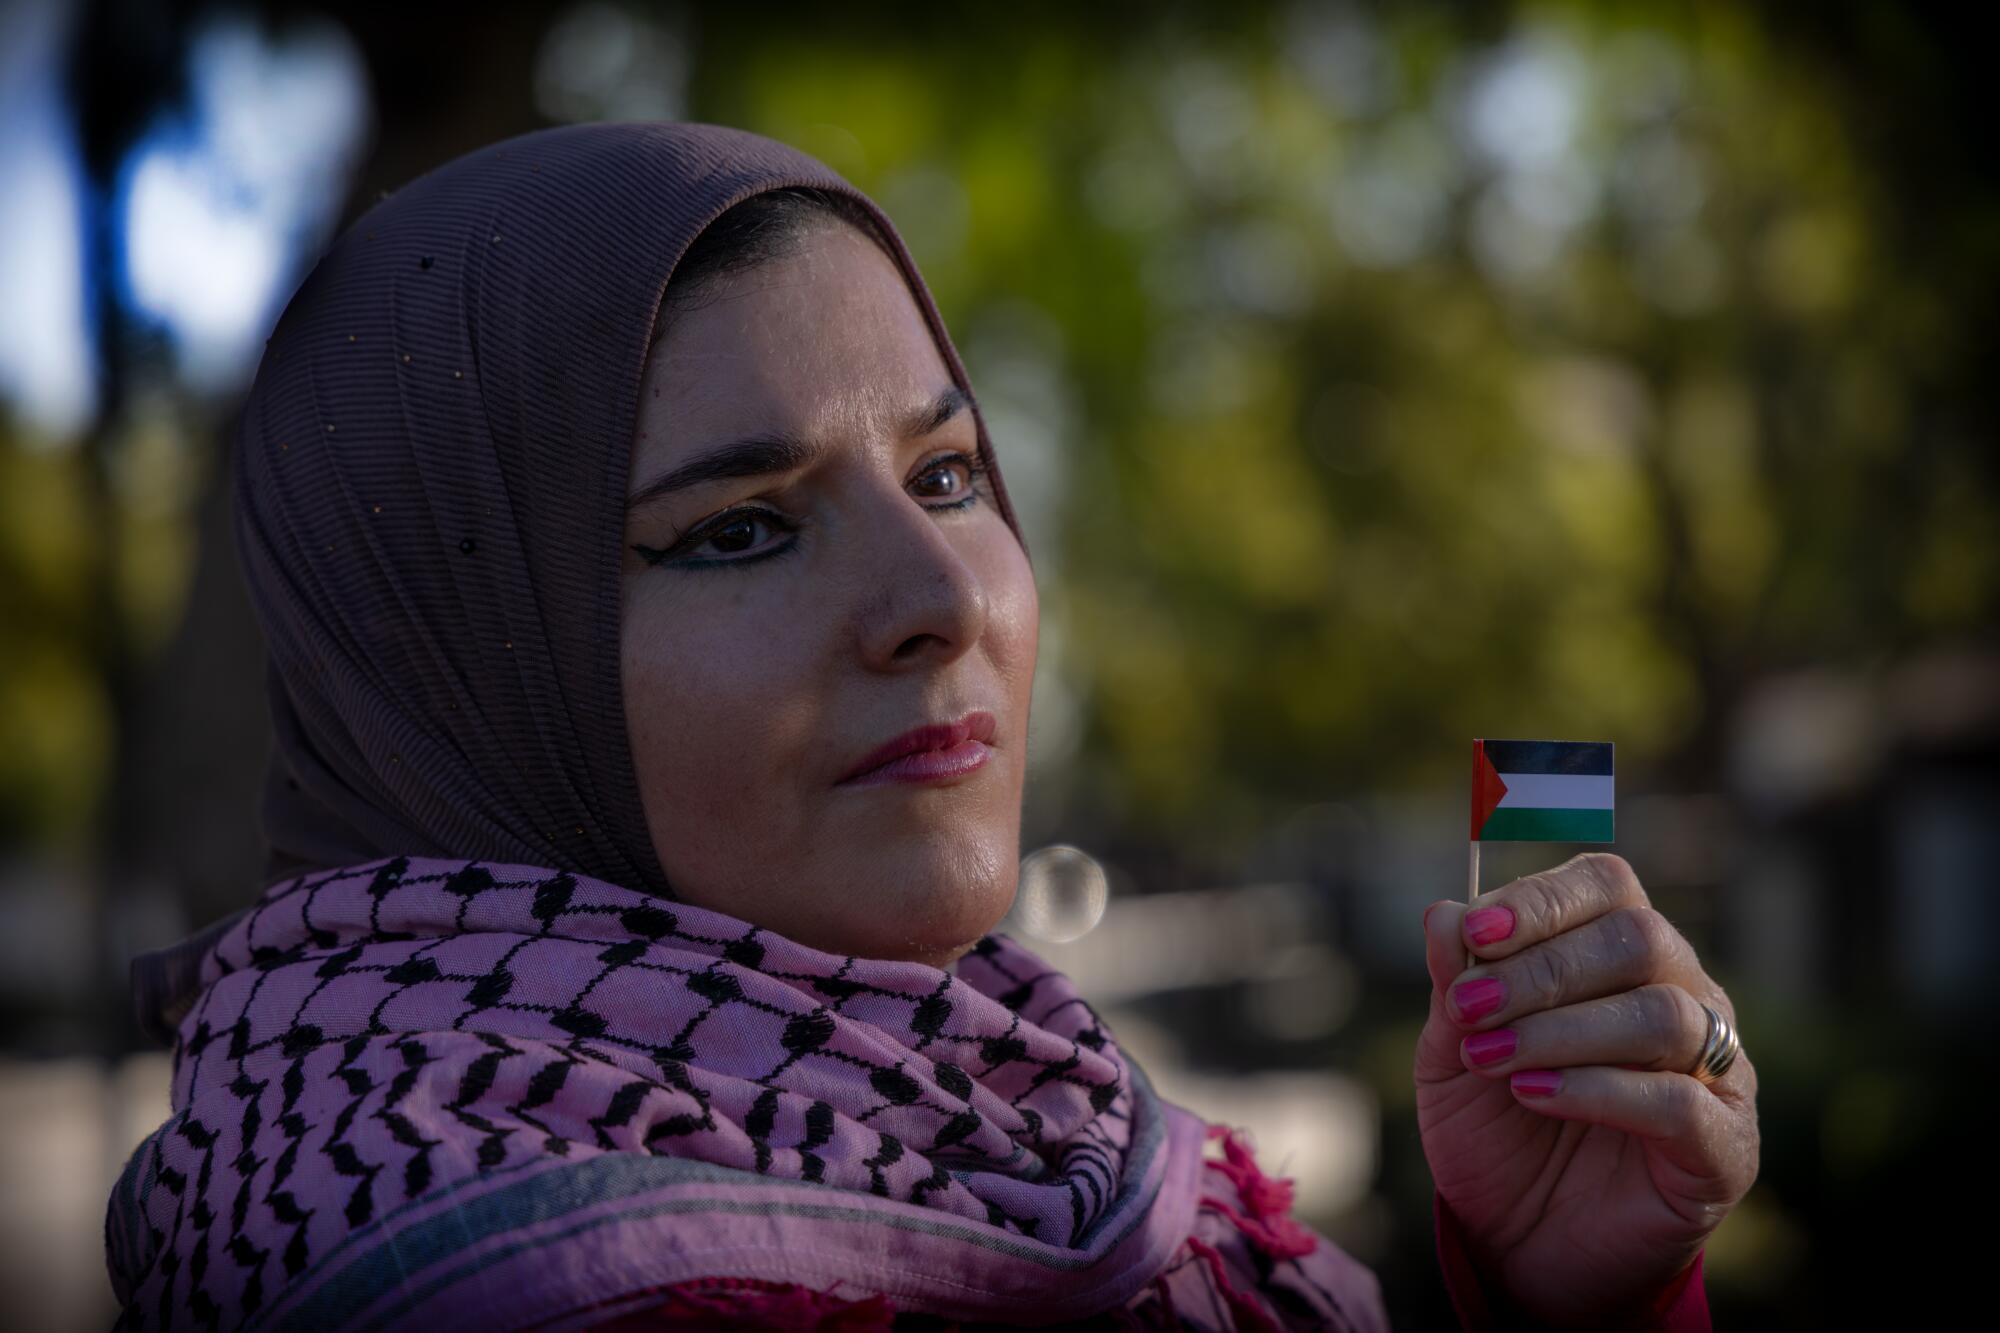 A woman holds up a miniature flag in one hand.